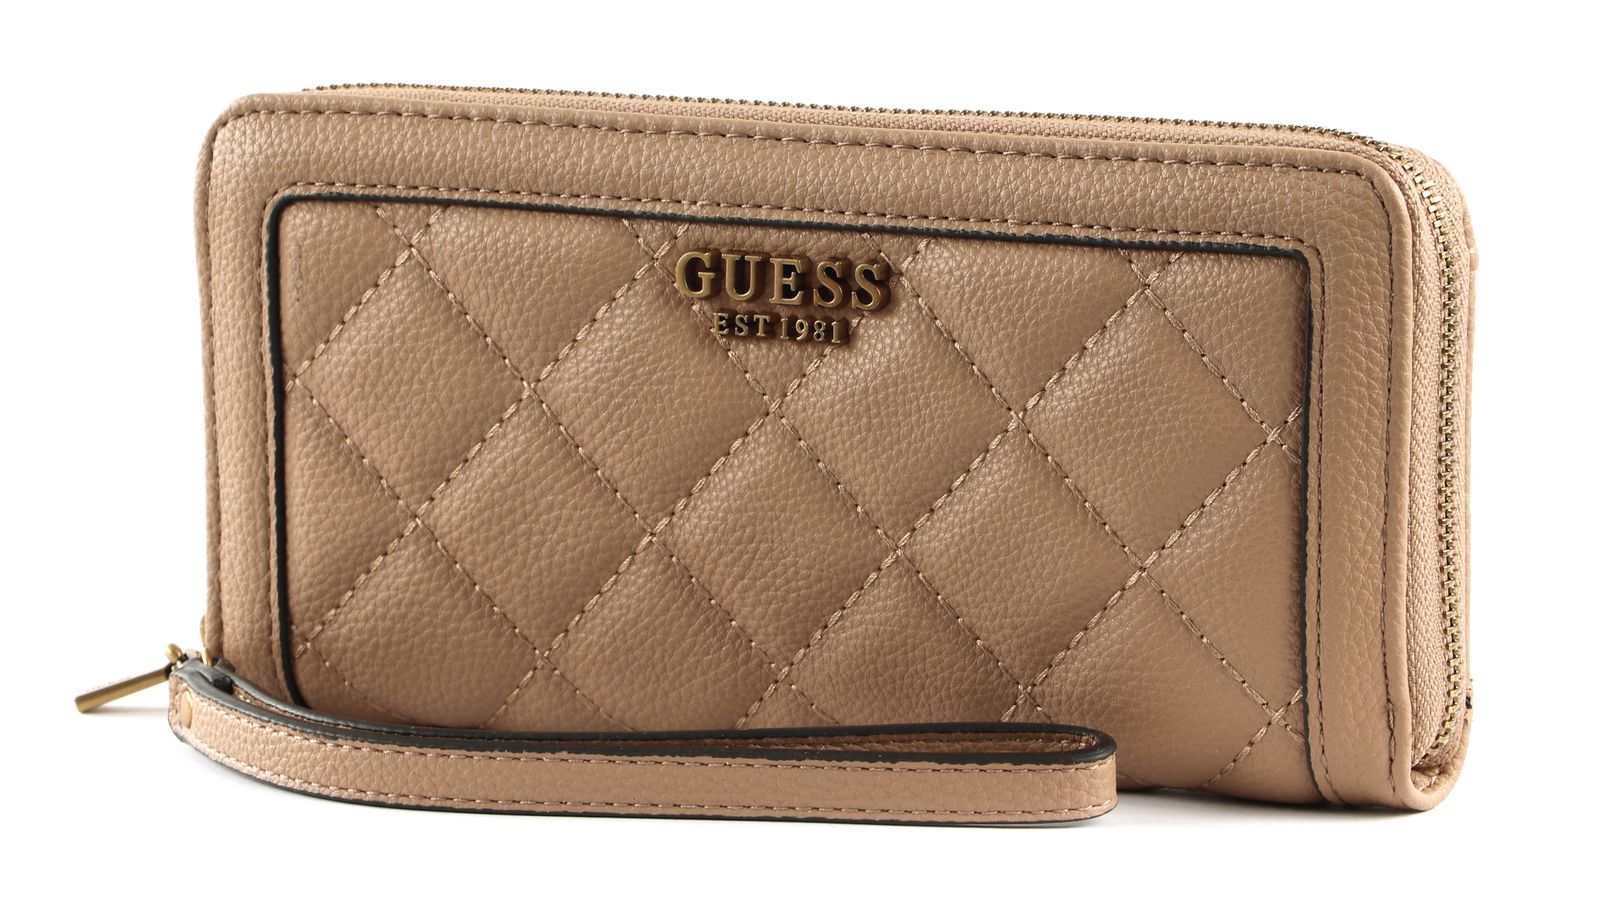 Guess ABEY SLG LARGE ZIP AROUND